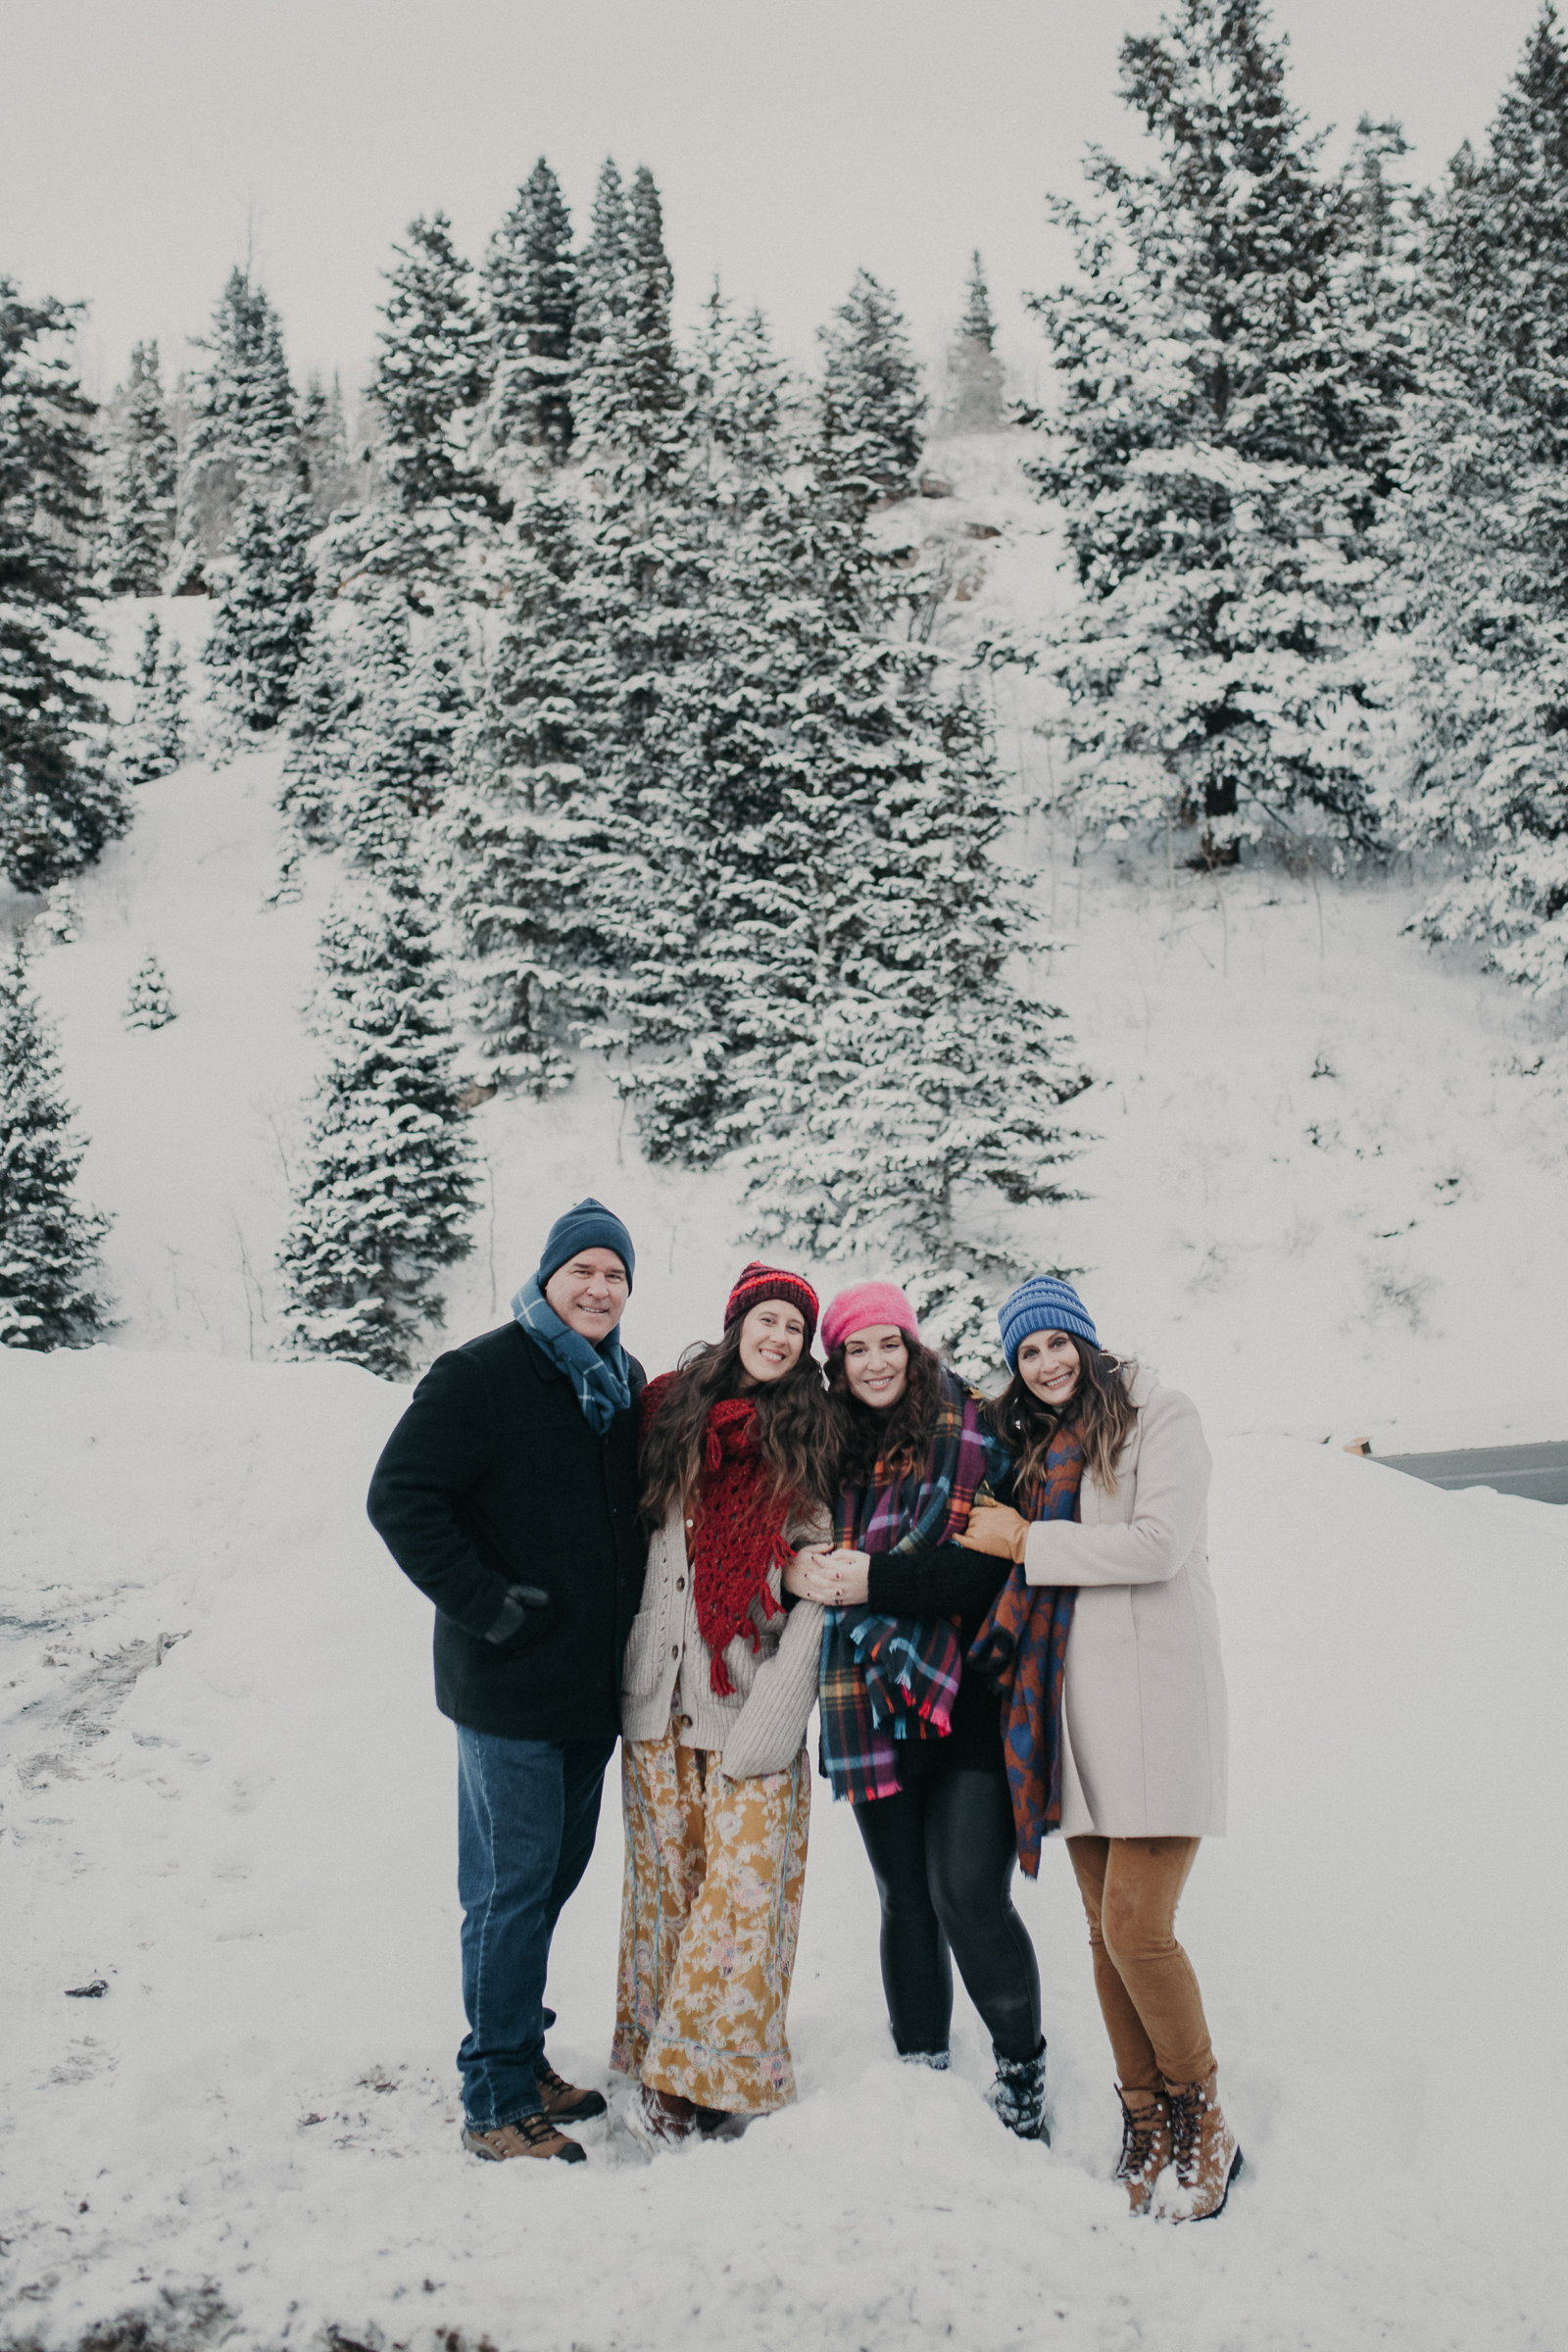 Extended family in snowy mountains 